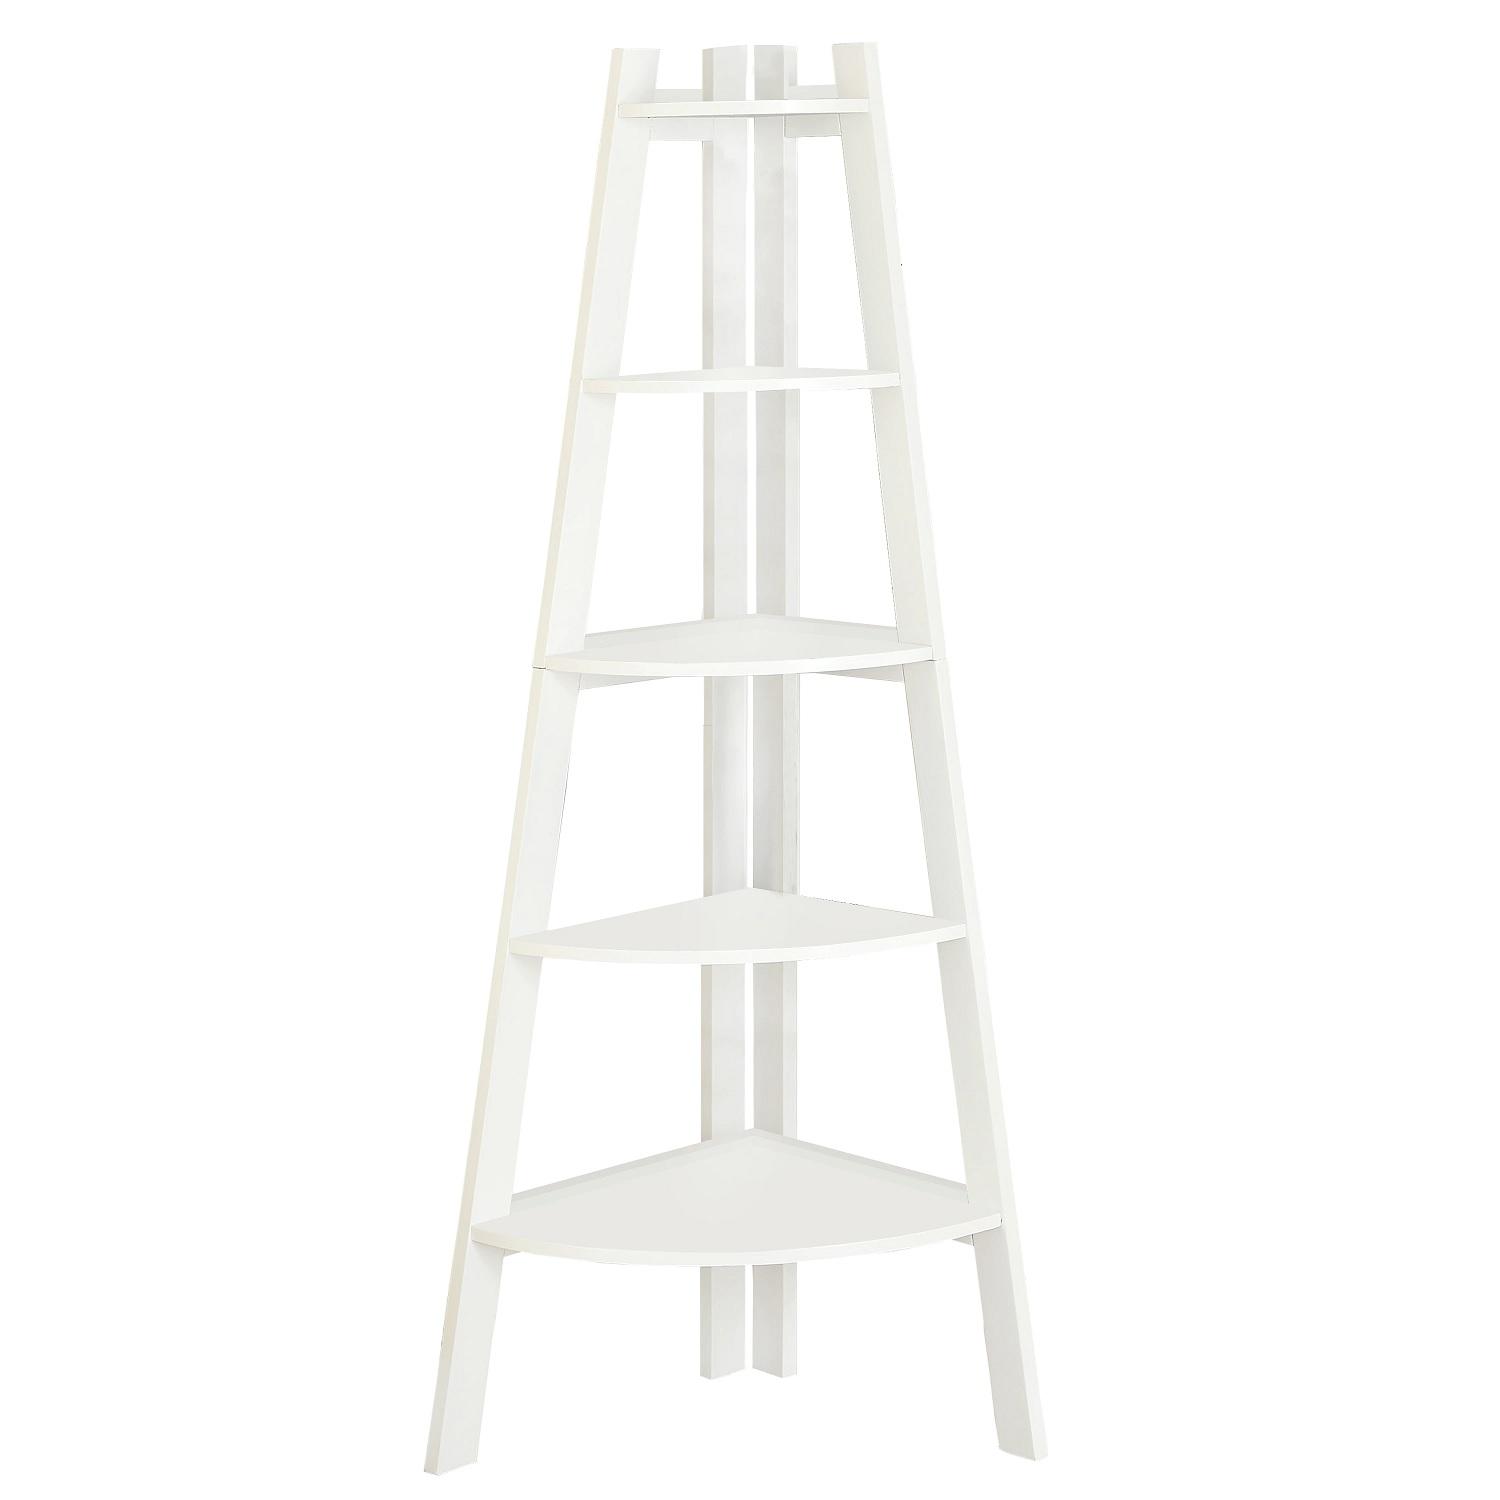 Transitional Ladder Shelf CM-AC6214WH Lyss CM-AC6214WH in White 